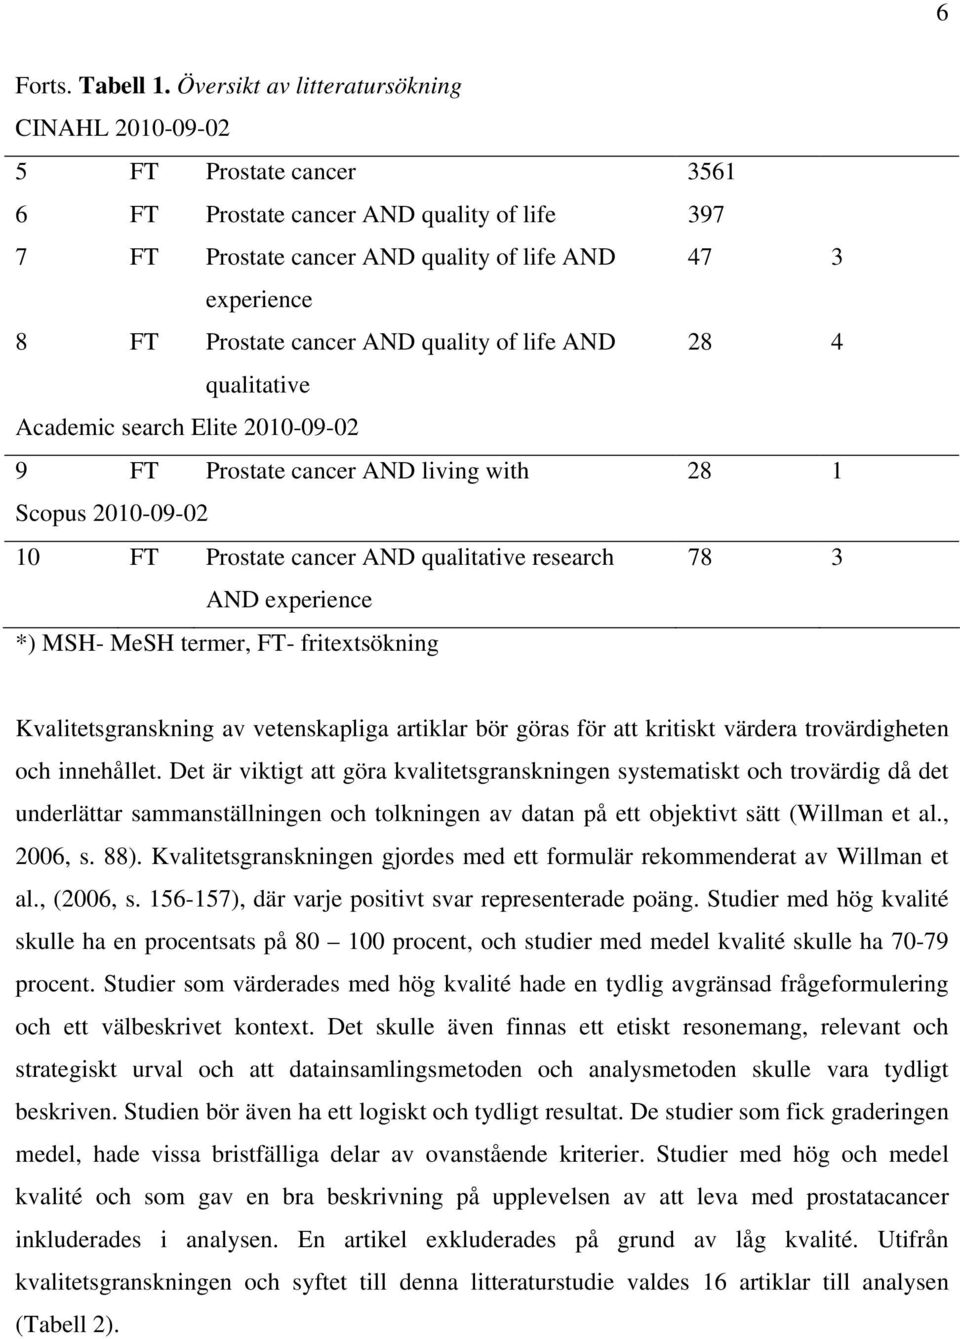 cancer AND quality of life AND 28 4 qualitative Academic search Elite 2010-09-02 9 FT Prostate cancer AND living with 28 1 Scopus 2010-09-02 10 FT Prostate cancer AND qualitative research 78 3 AND